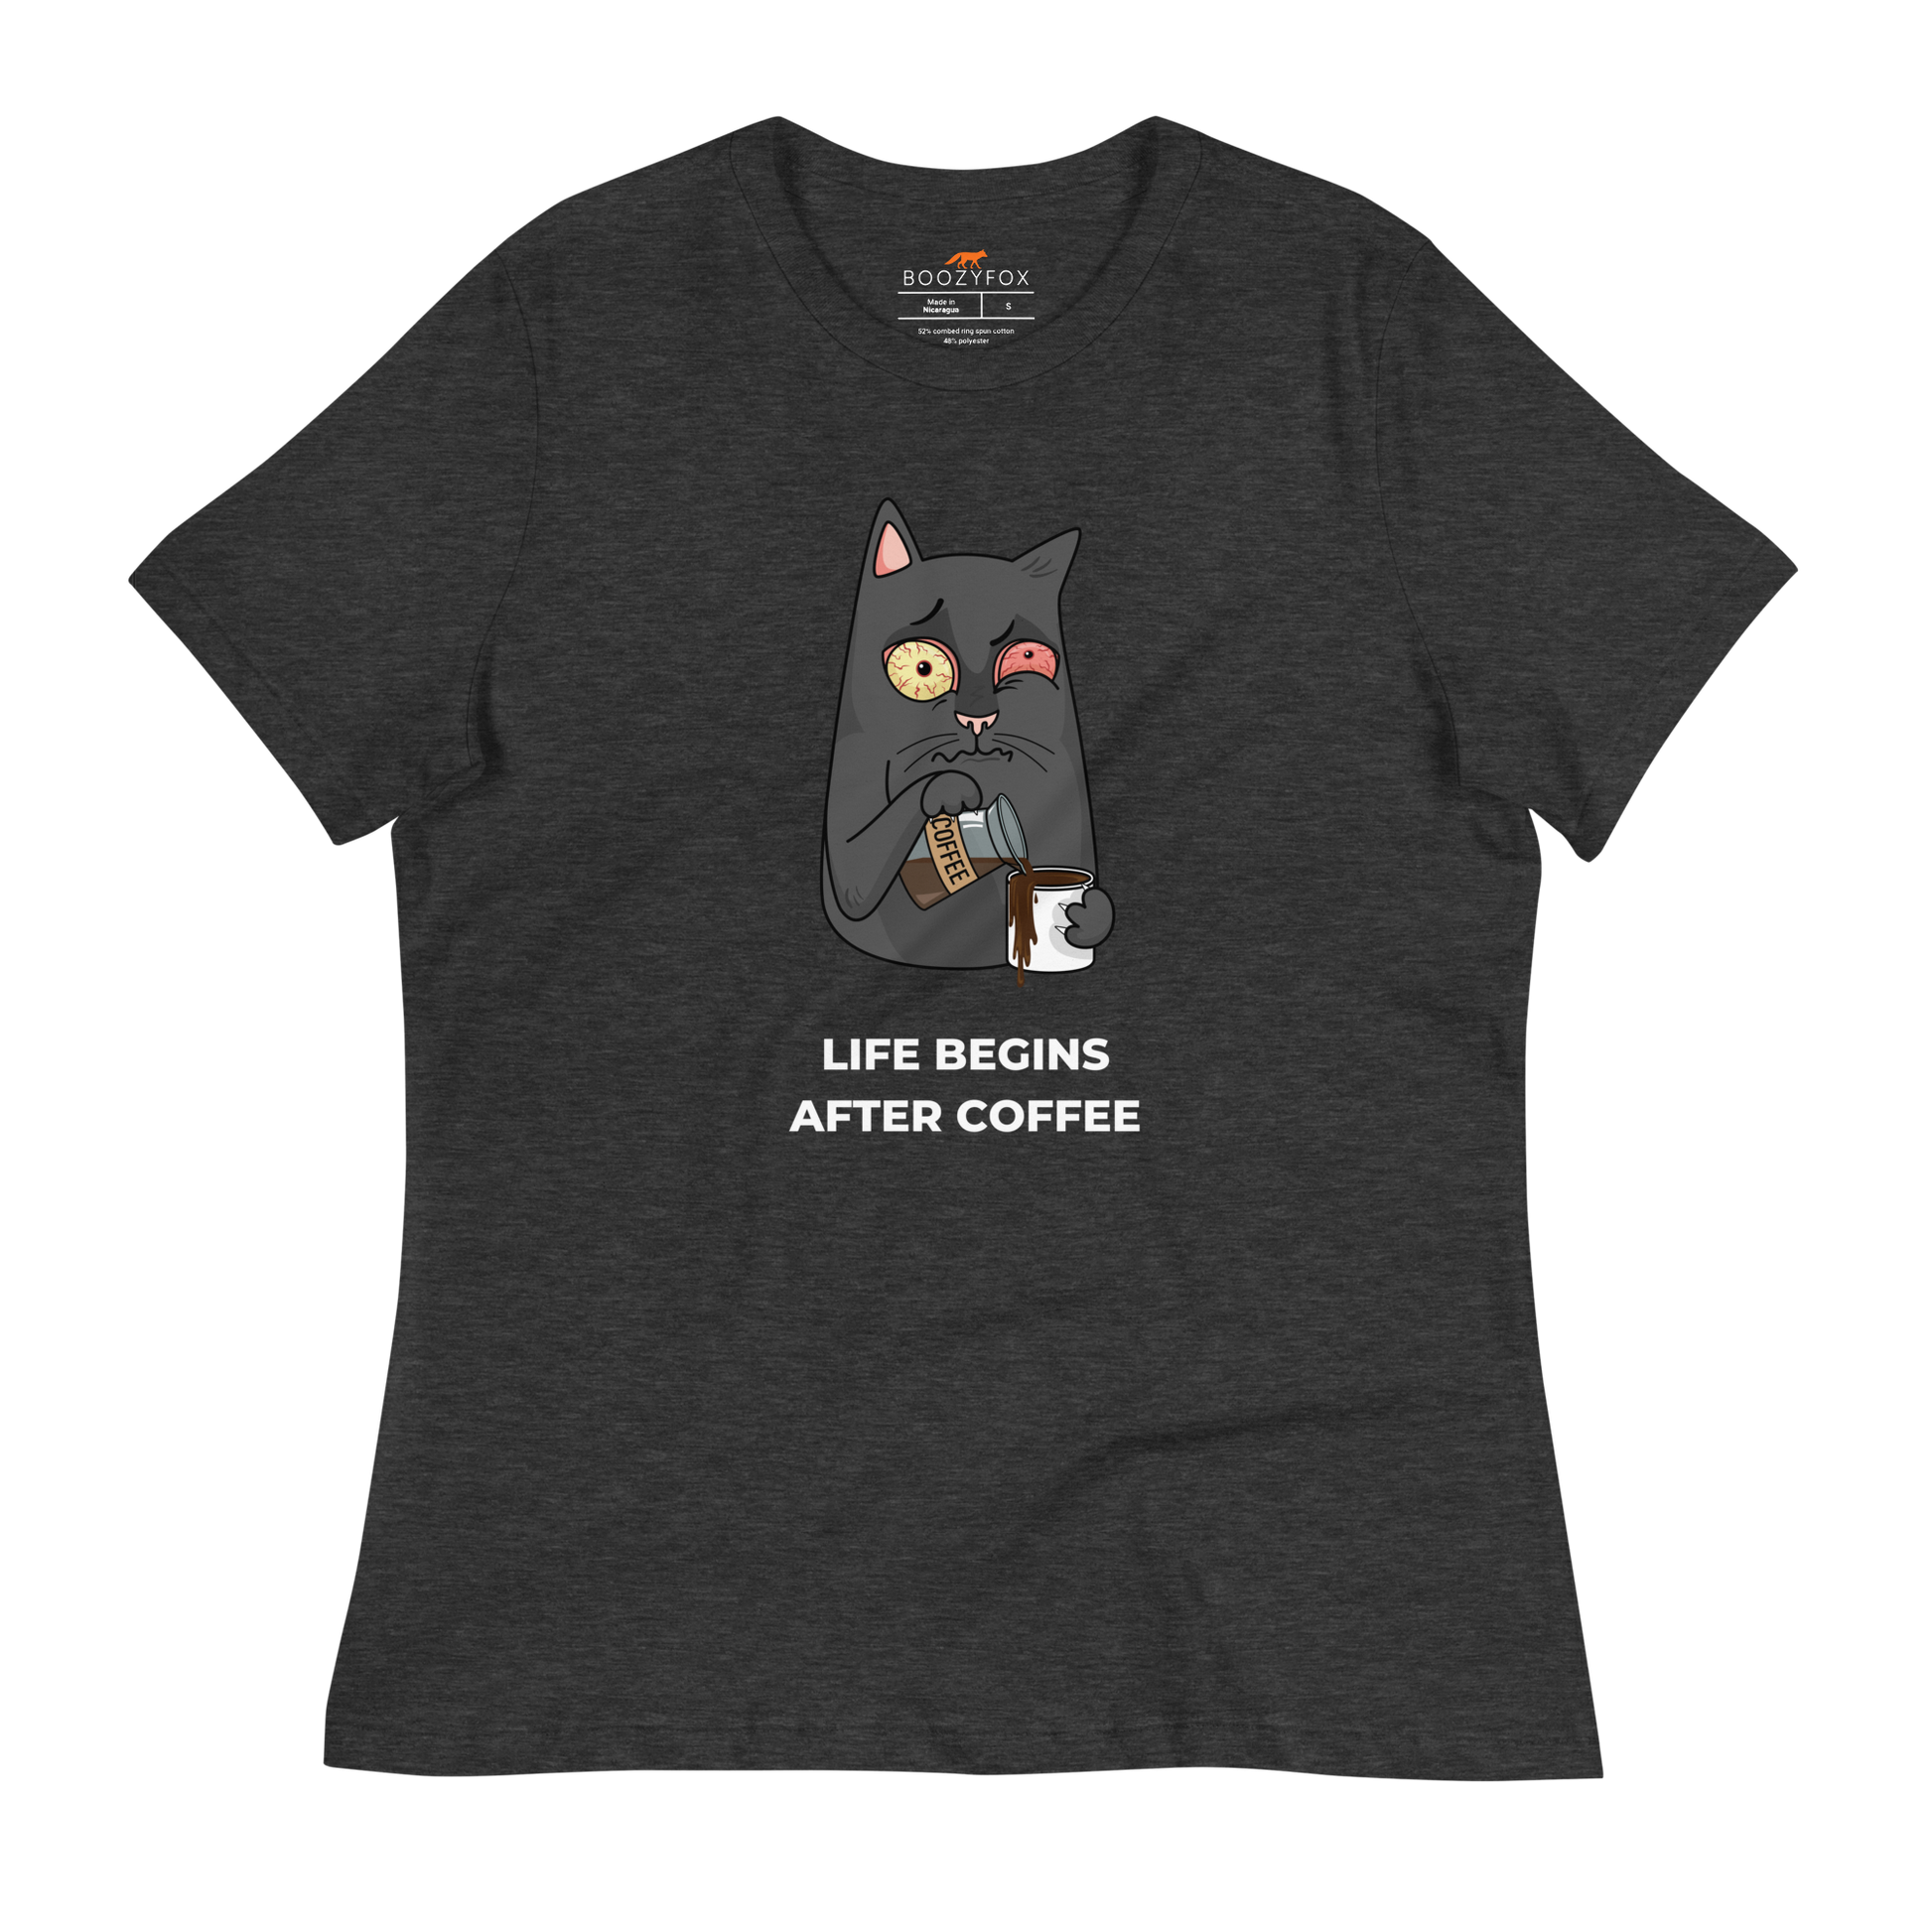 Women's relaxed dark grey heather cat t-shirt featuring a hilarious Life Begins After Coffee graphic on the chest - Women's Graphic Cat Tees - Boozy Fox